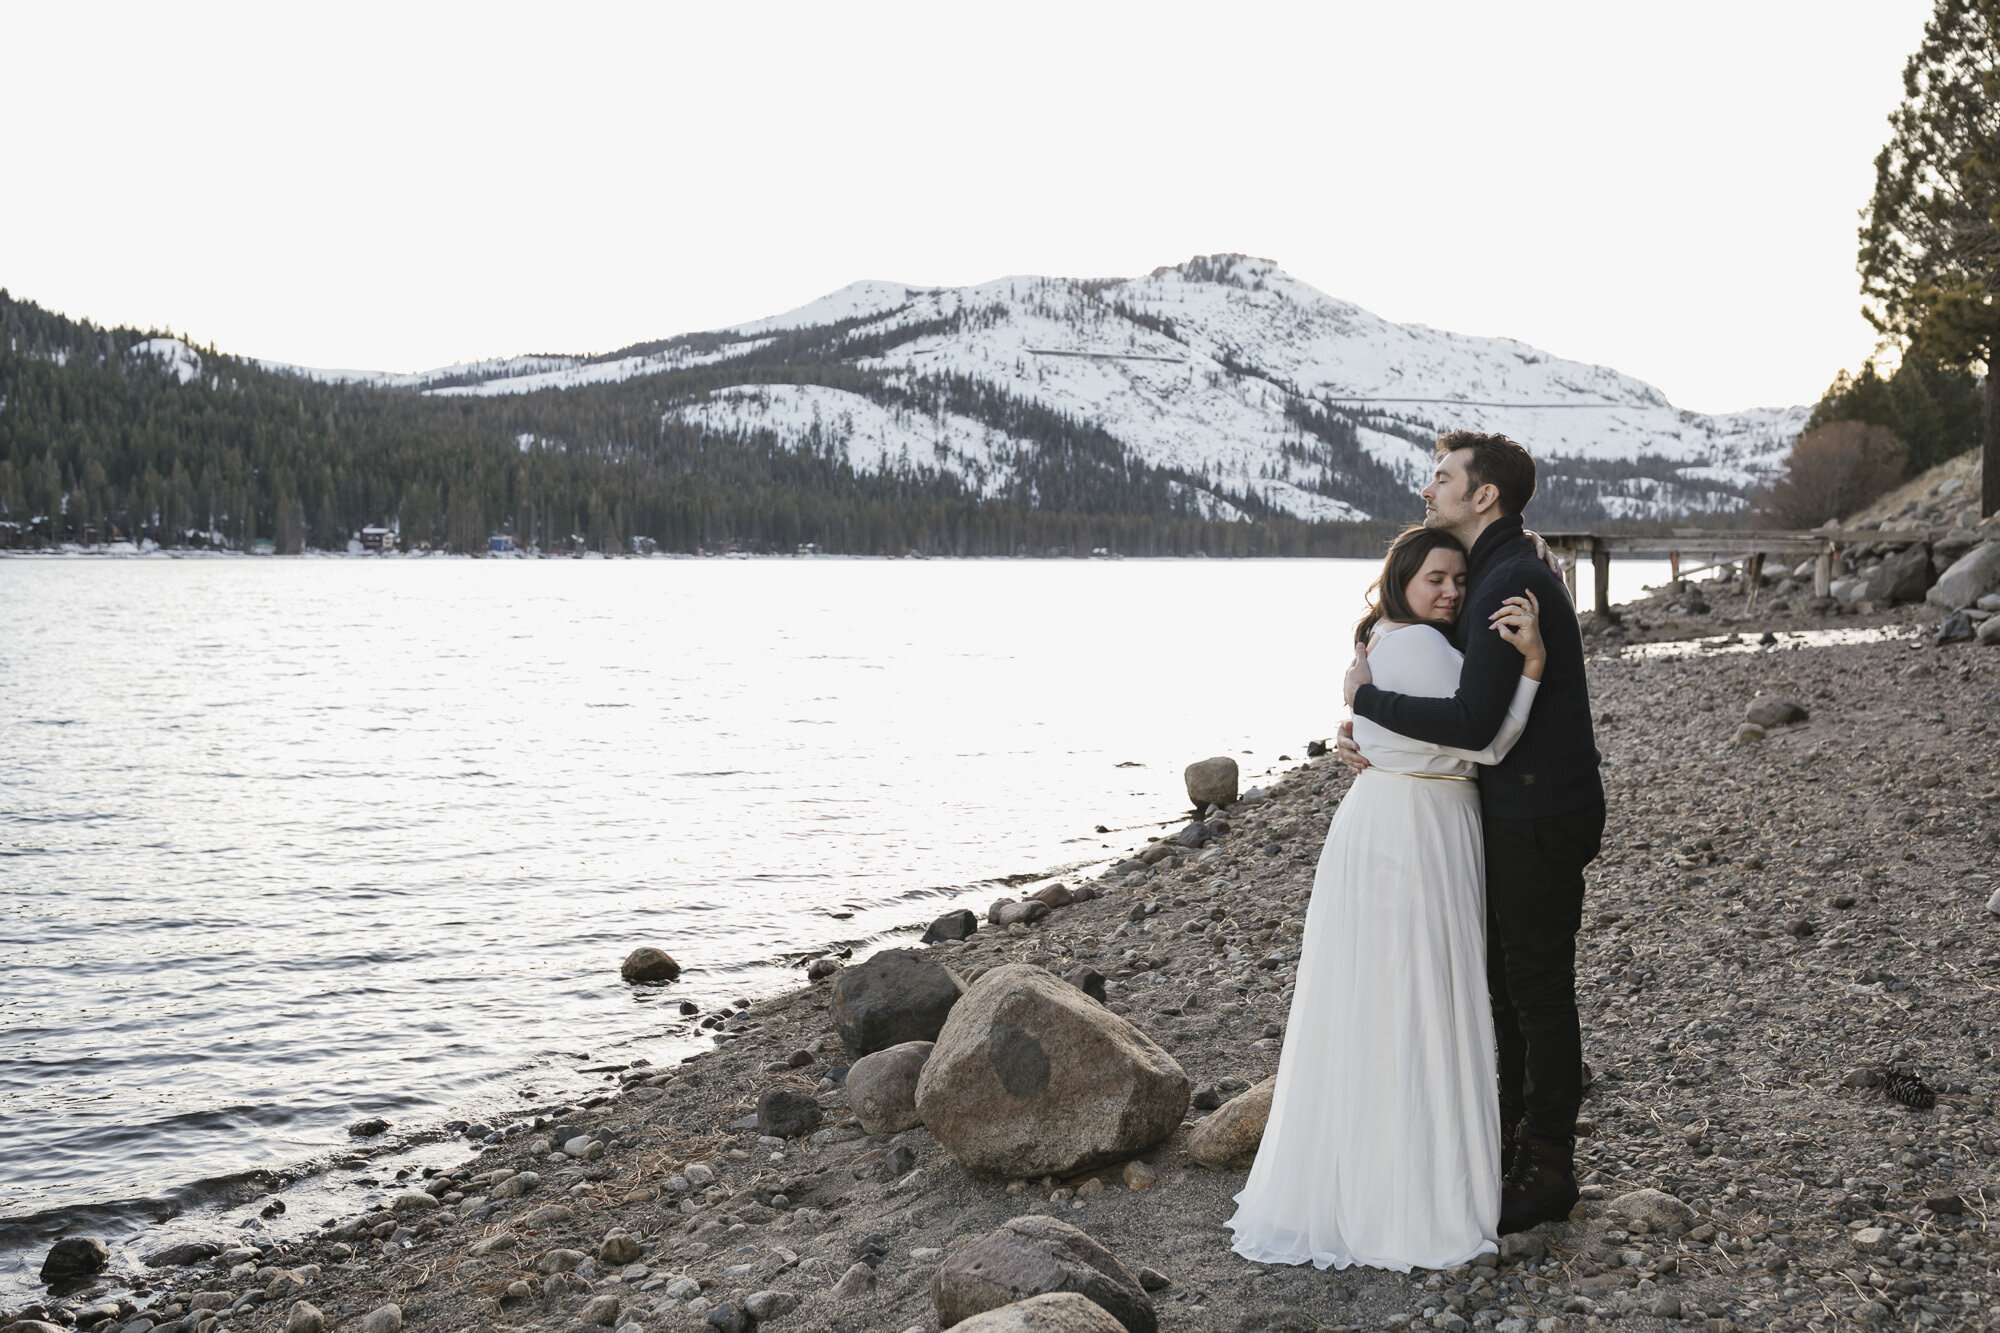 Wedding couple hug each other lakeside at Donner Lake with the snowy summit in the background